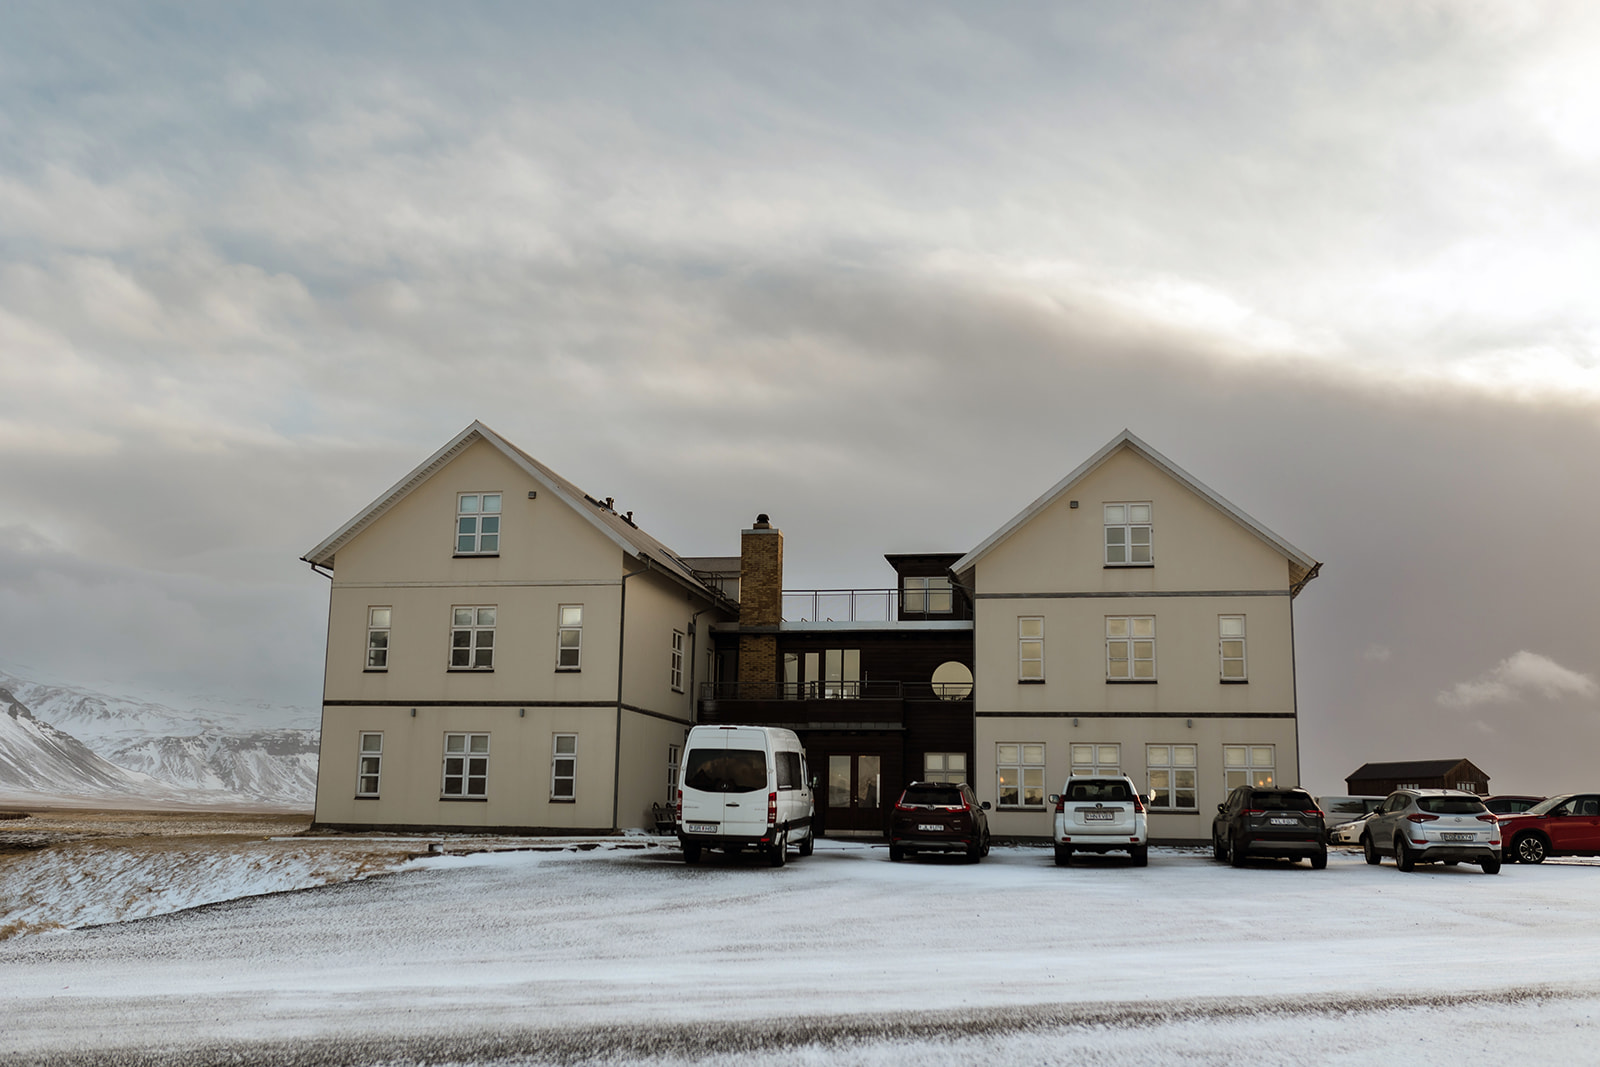 Hotel Búðir in Iceland during the winter time